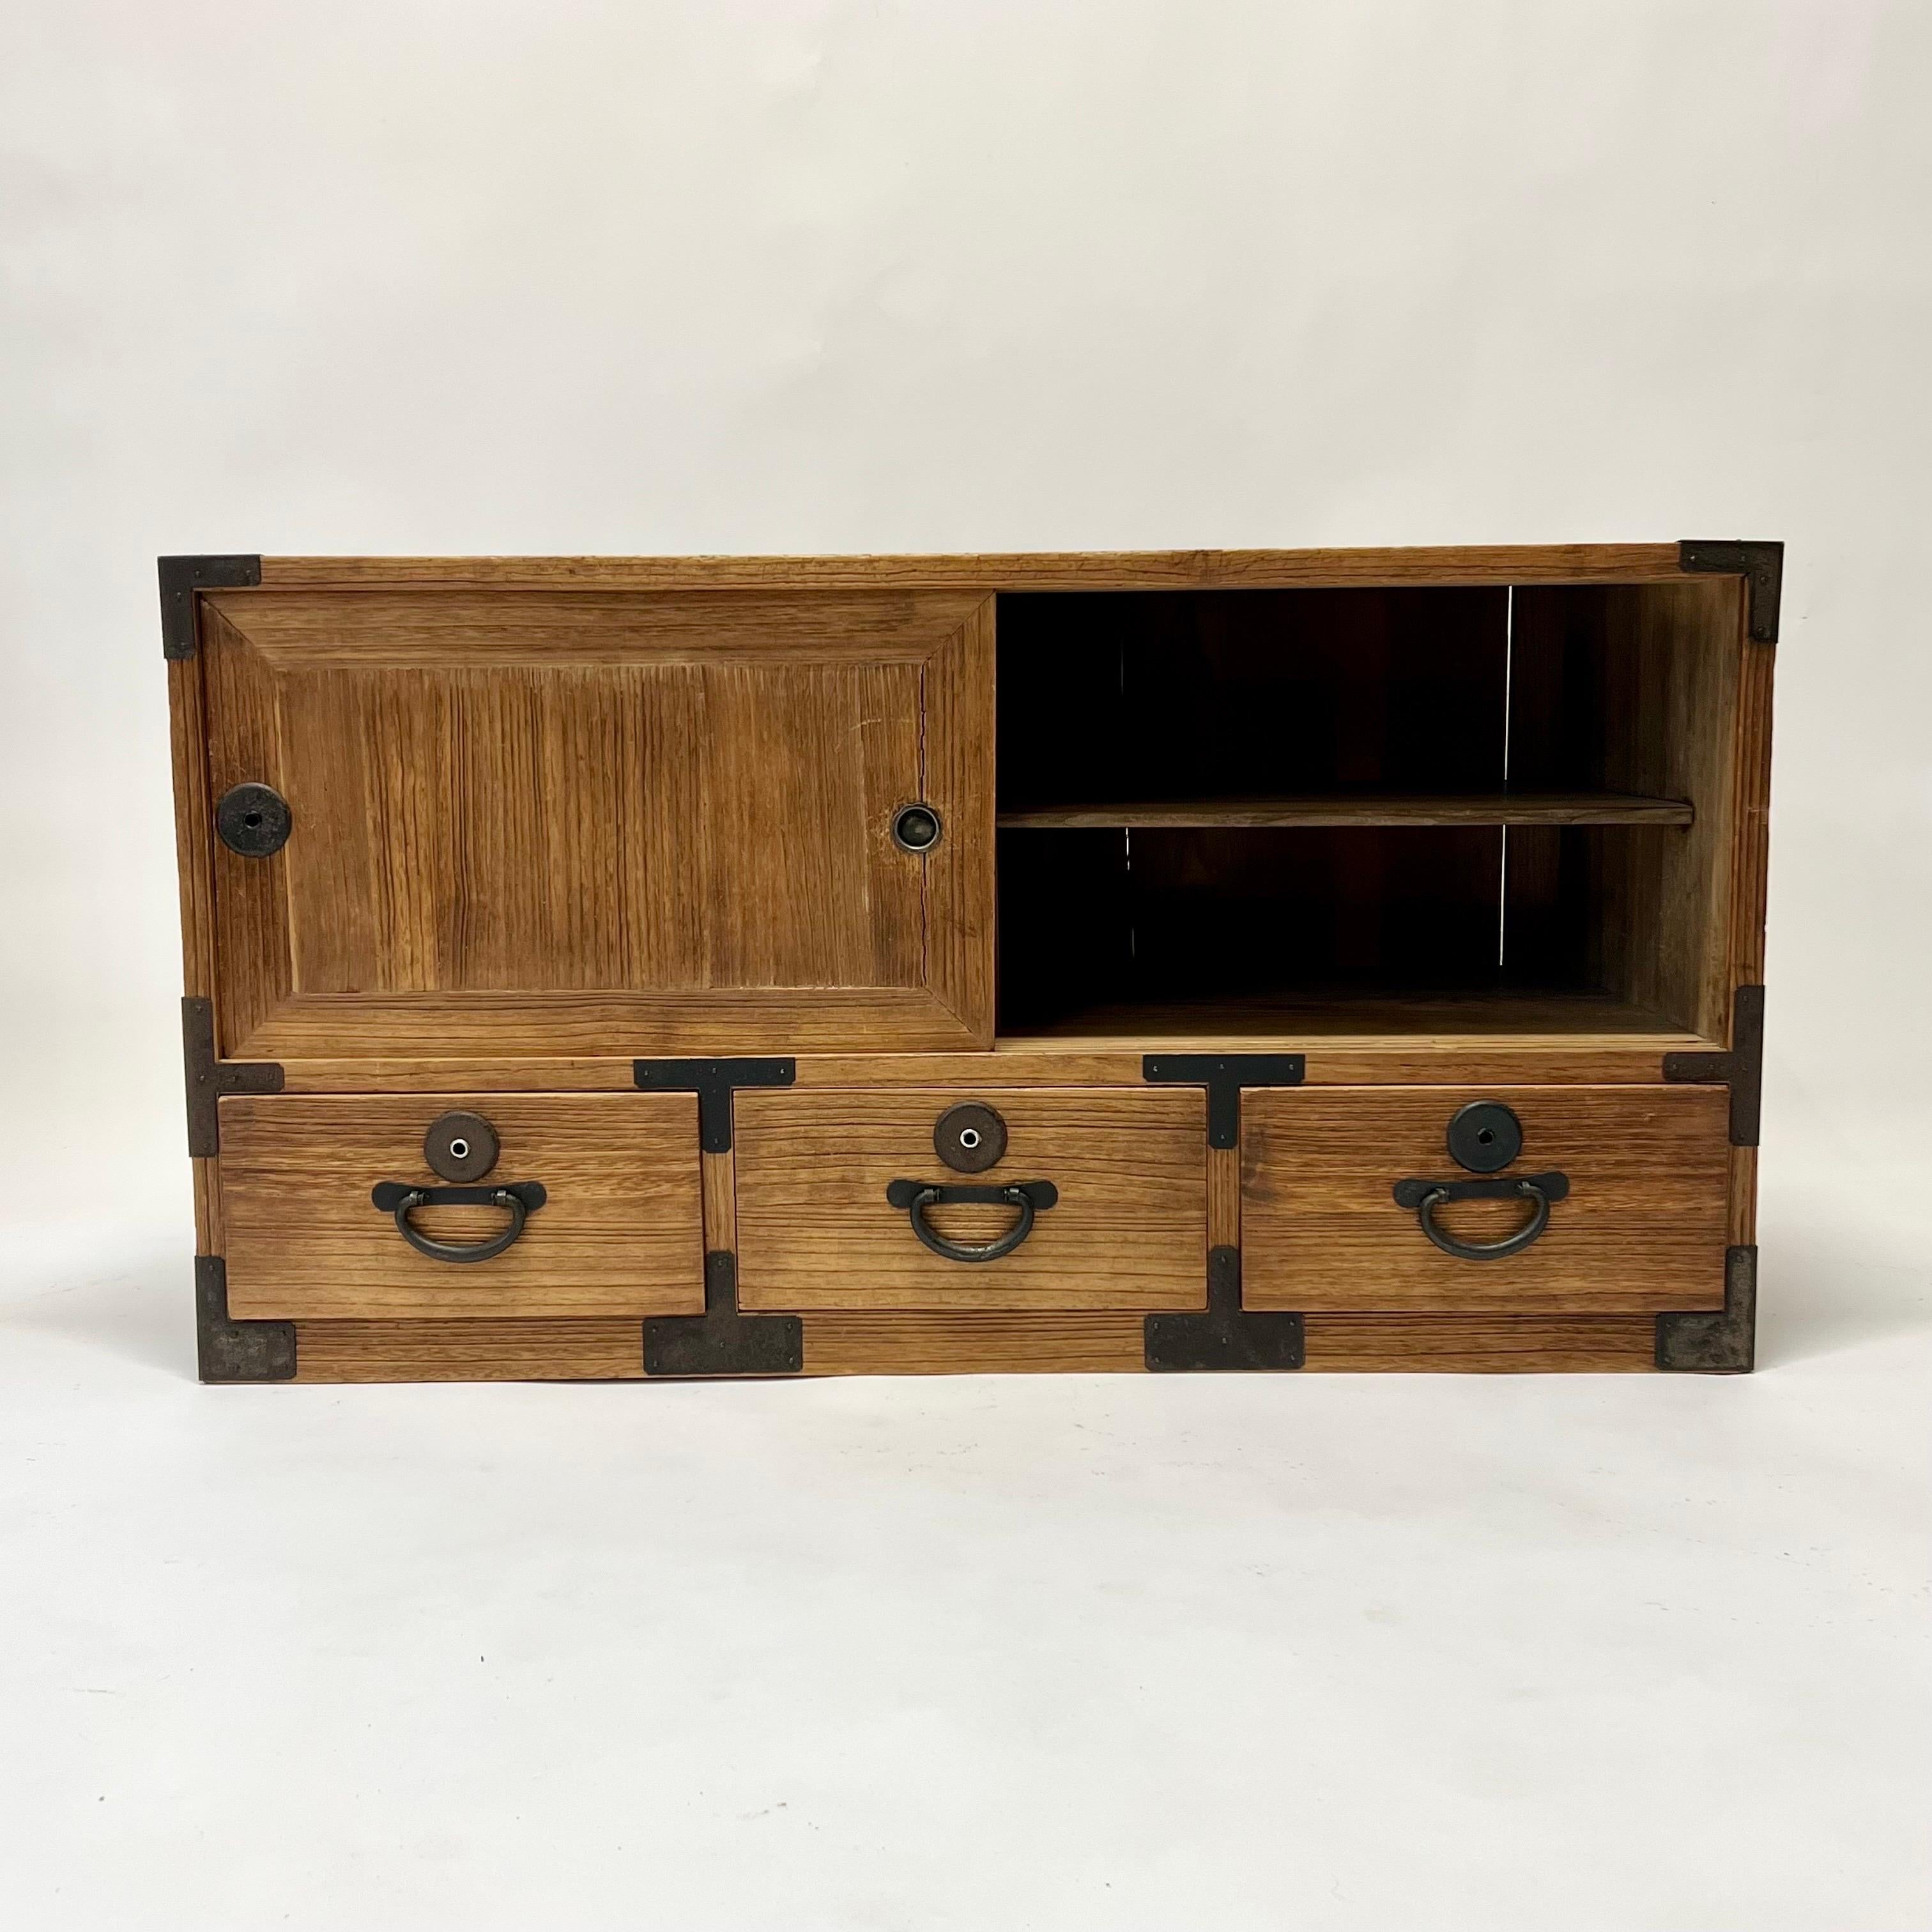 Gorgeous low antique Japanese Tansu from the early 1900s with wonderful detail and patina. Very functional piece with a shelf on the right side, and open on the left. Three drawers on the bottom. Iron handles that stay hidden when not in use. All